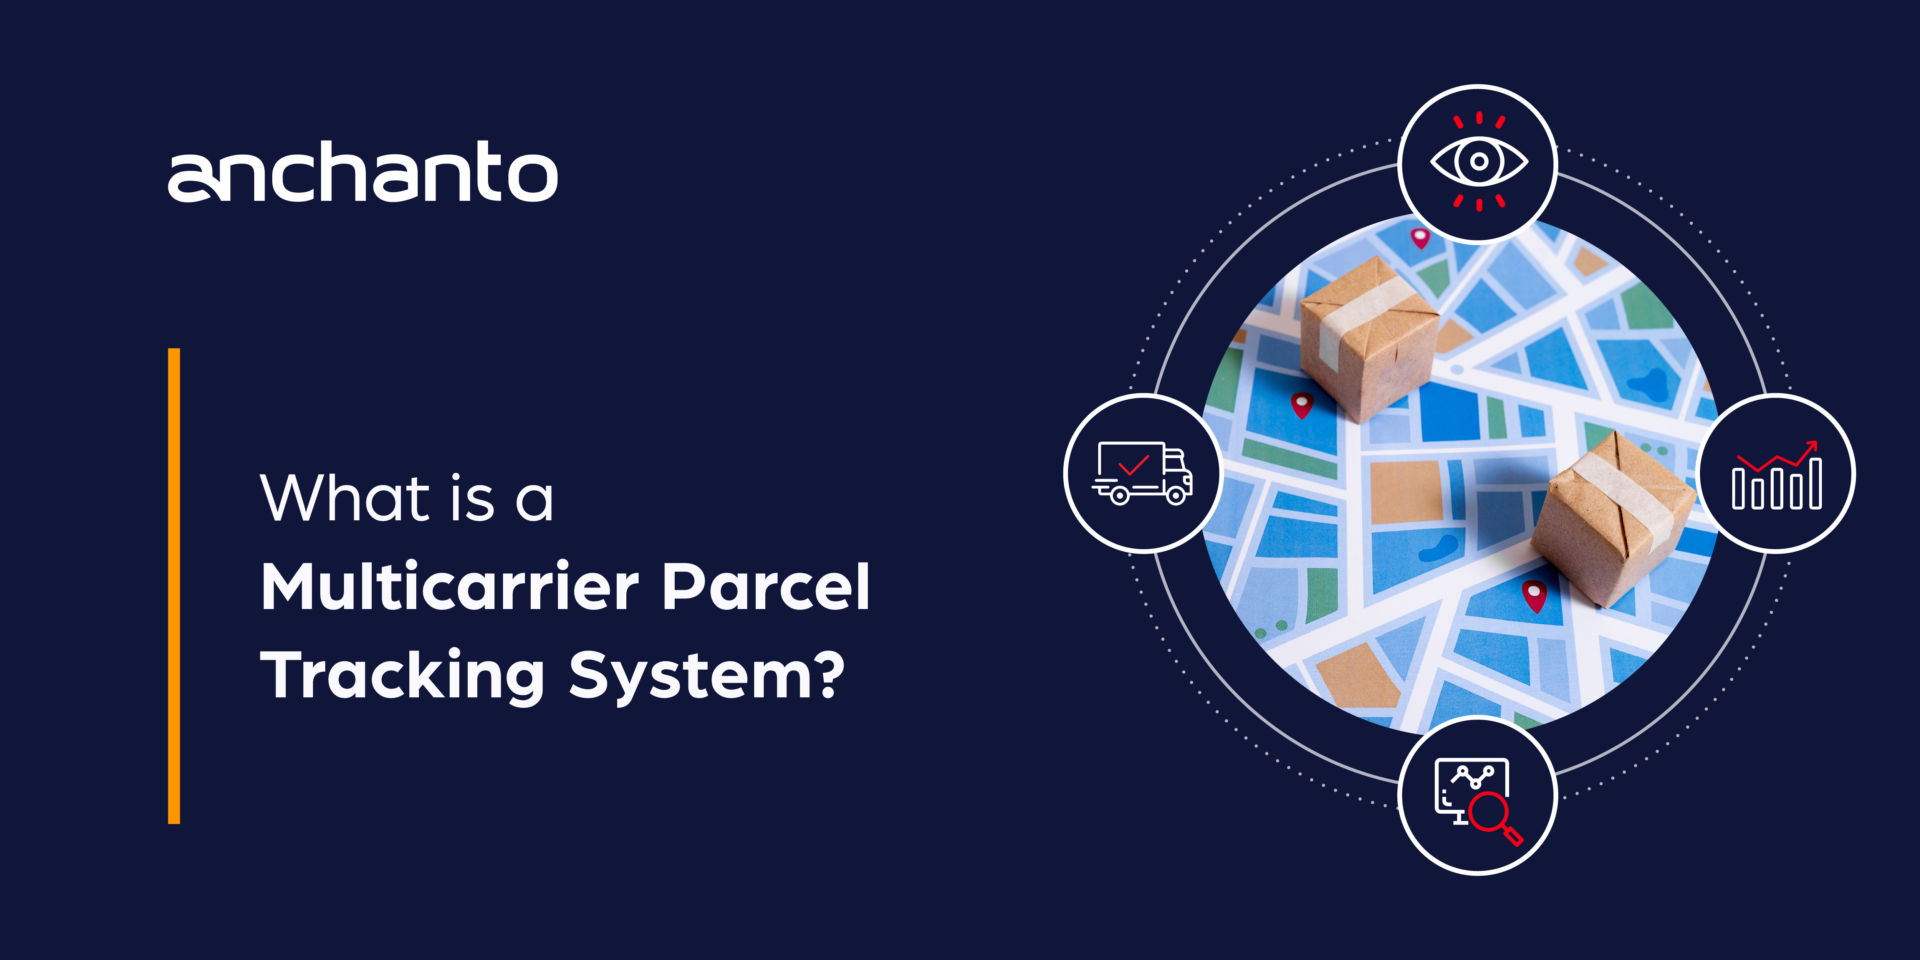 What is a Multicarrier Parcel Tracking System?